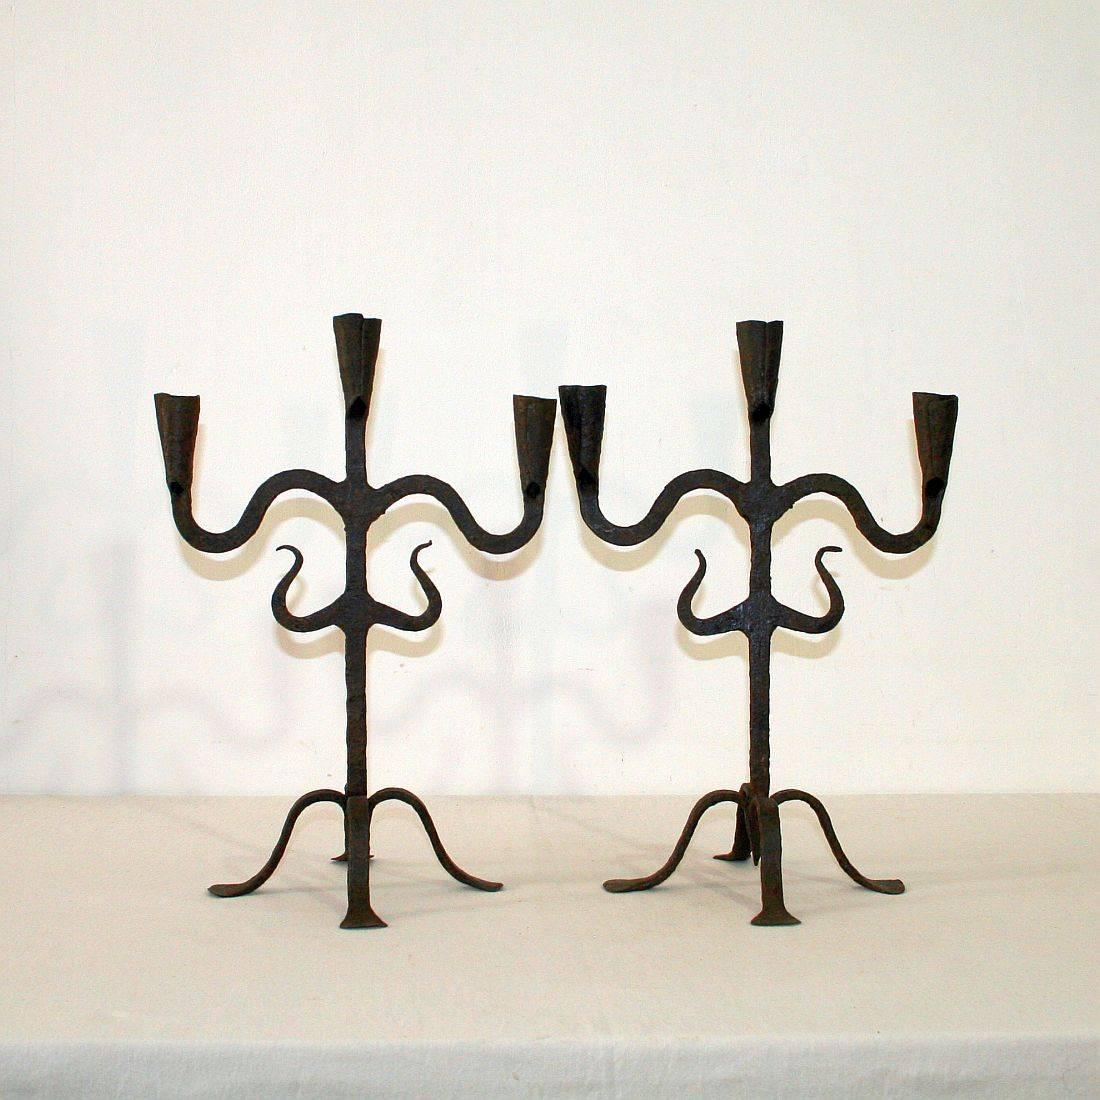 Beautiful and rare pair of hand-forged iron candleholders, Southern France/ Northern, Spain, 18th century. Weathered.